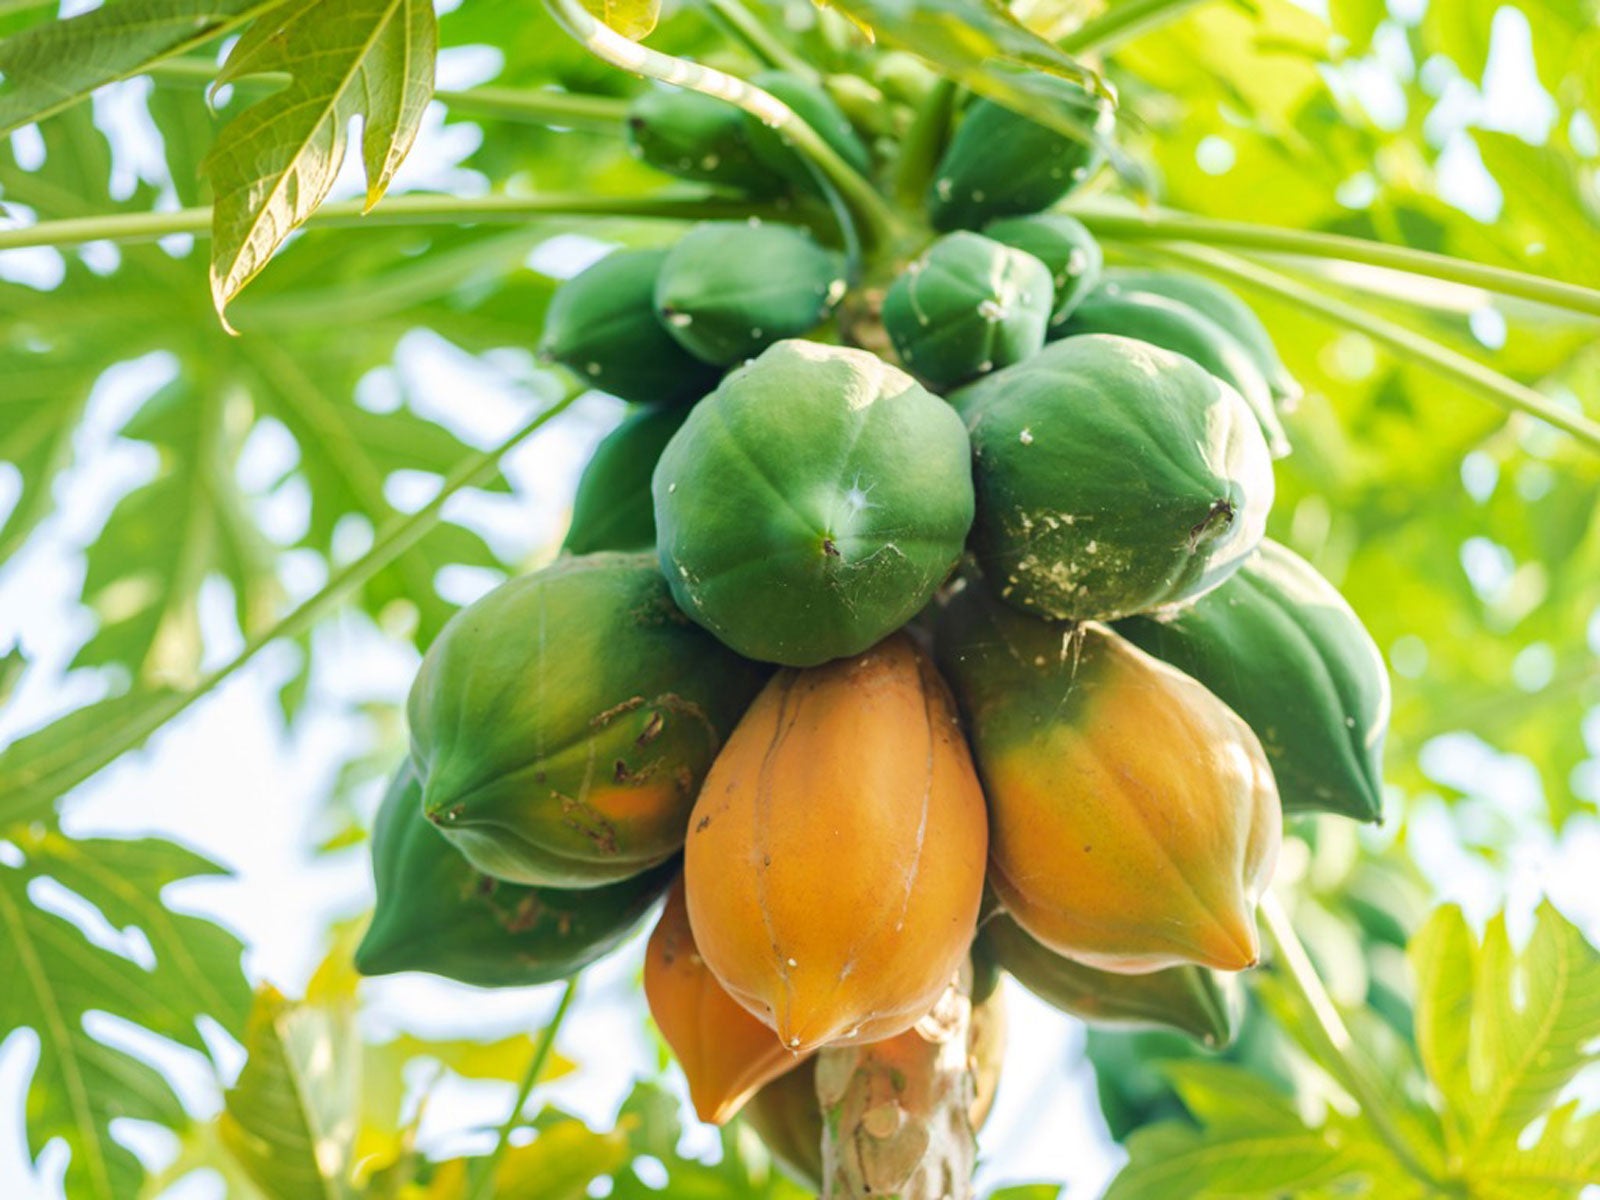 How To Harvest Papayas Papaya Harvesting Methods,Cooking Chestnuts In The Oven